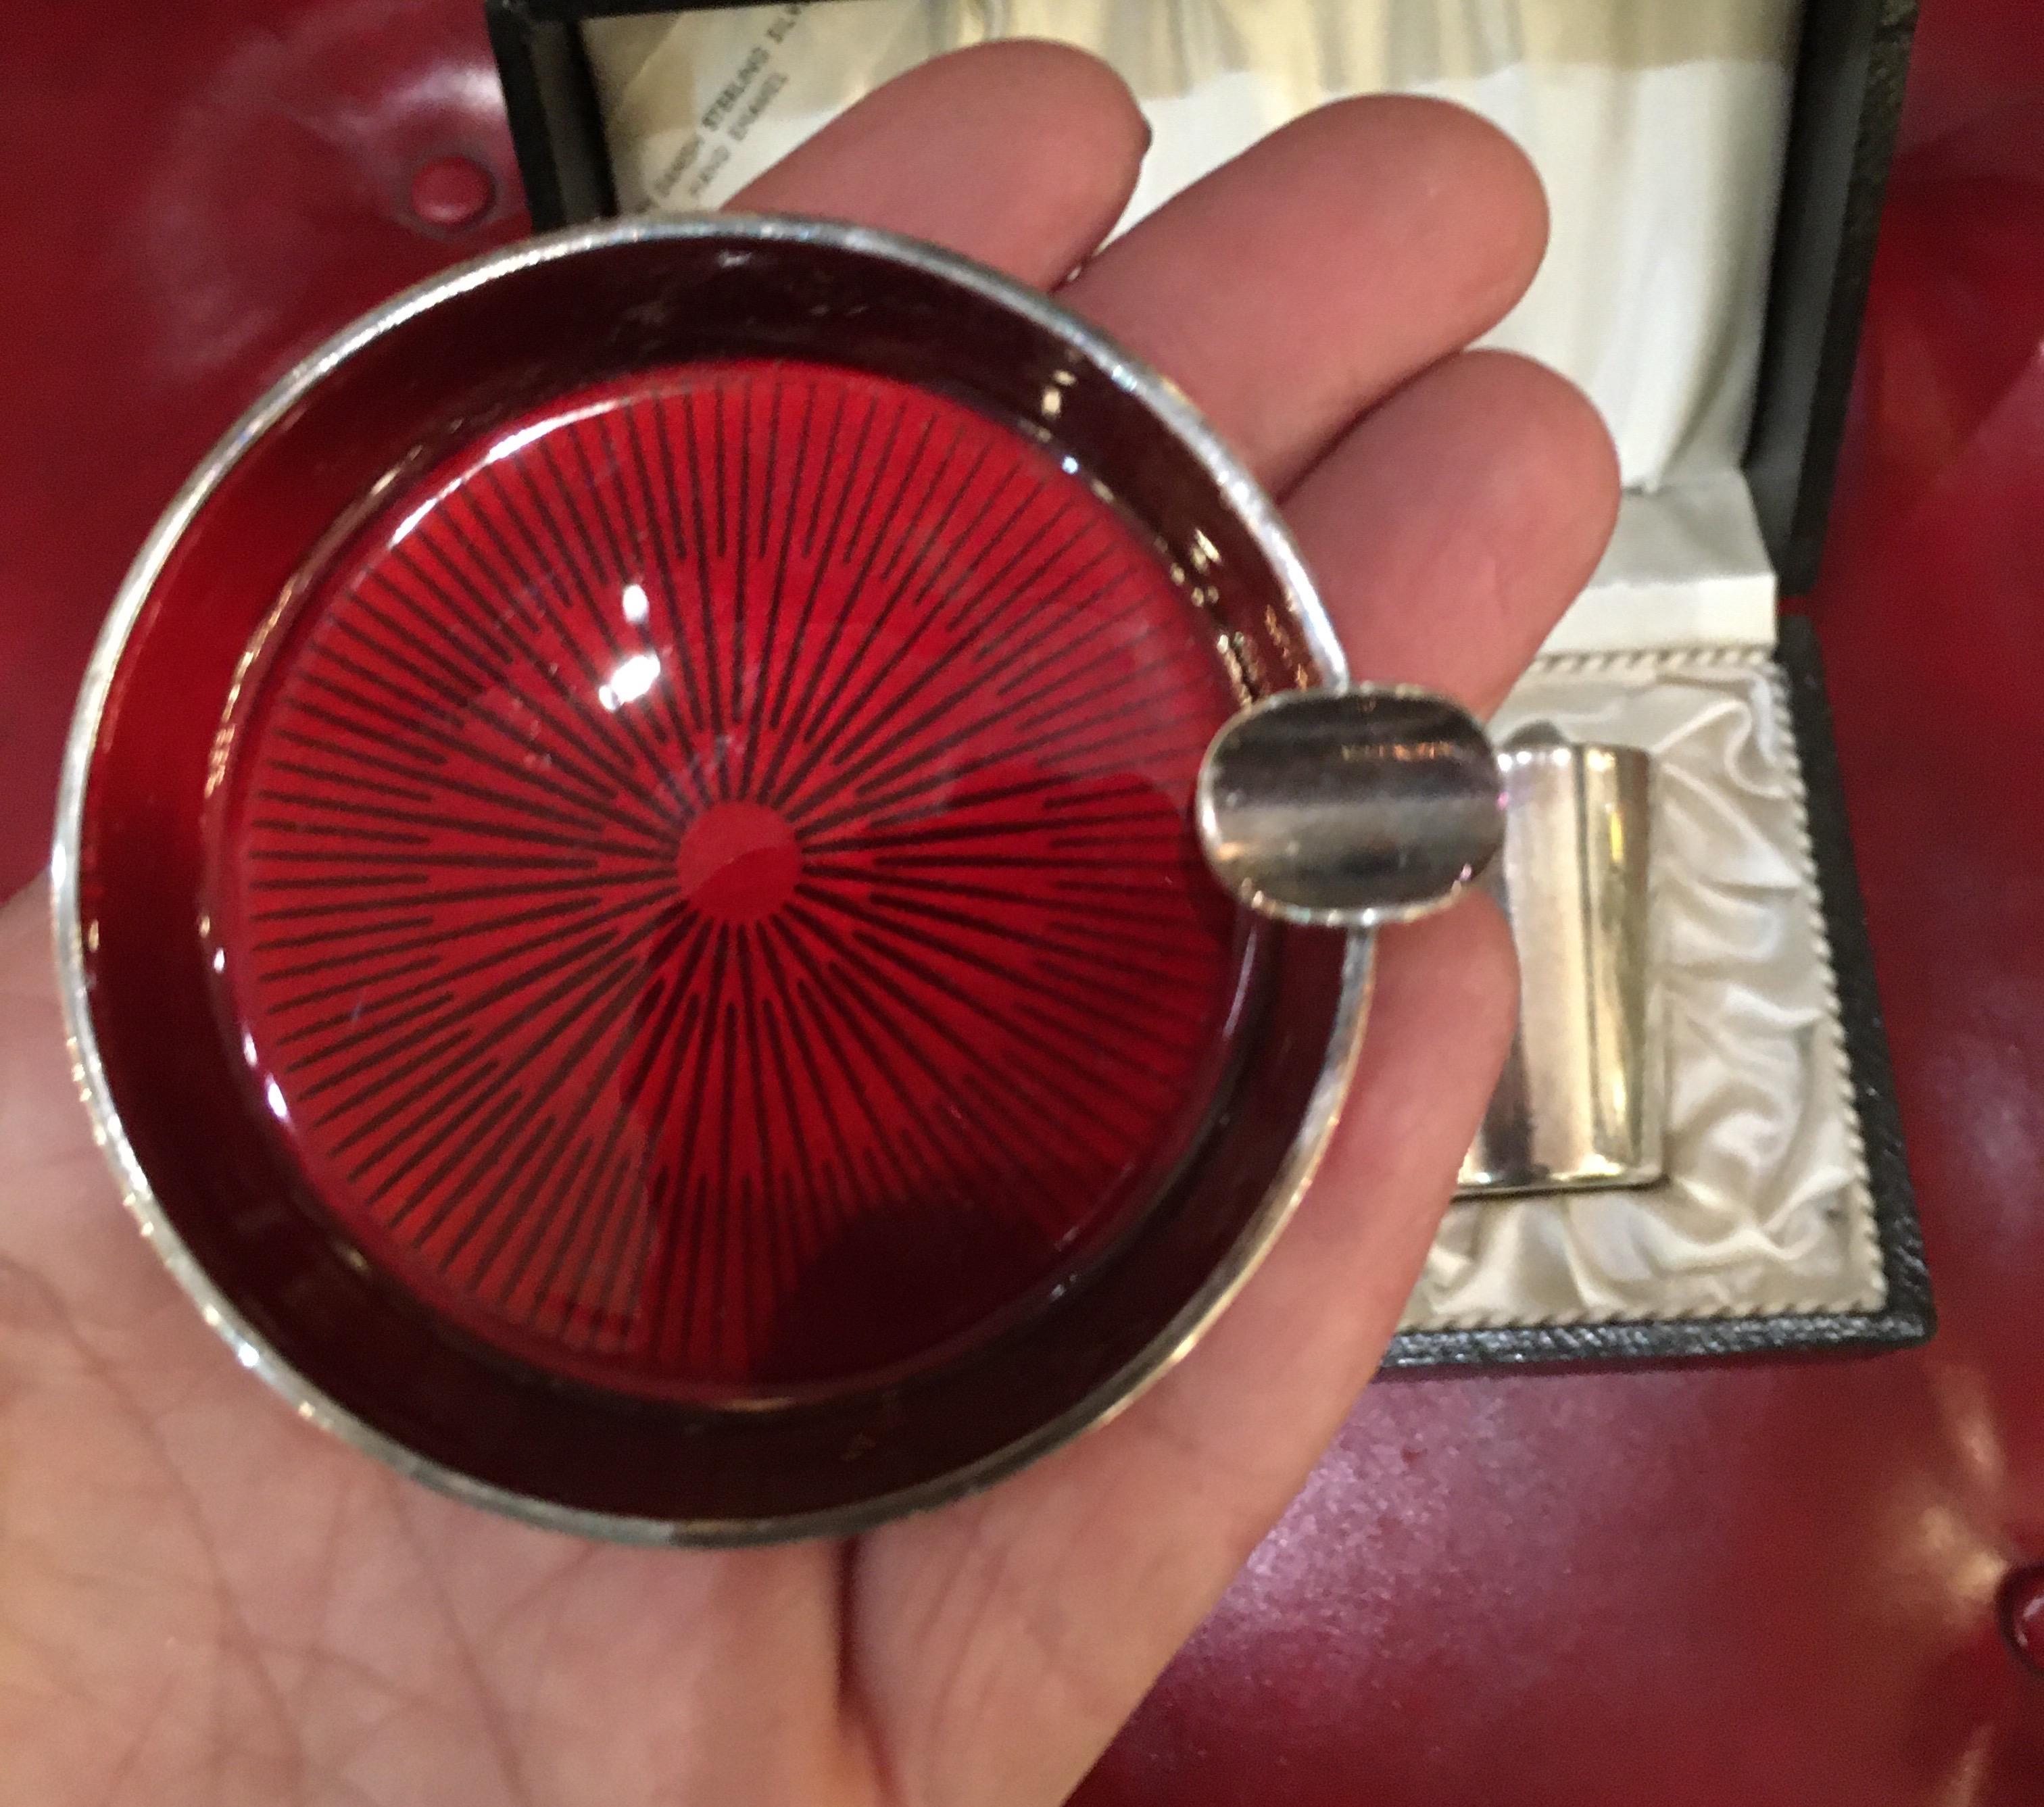 Sterling silver and hand enameled personal ash tray and shot glass in presentation box, mid-20th century, Denmark. Perfect gift for him or her.